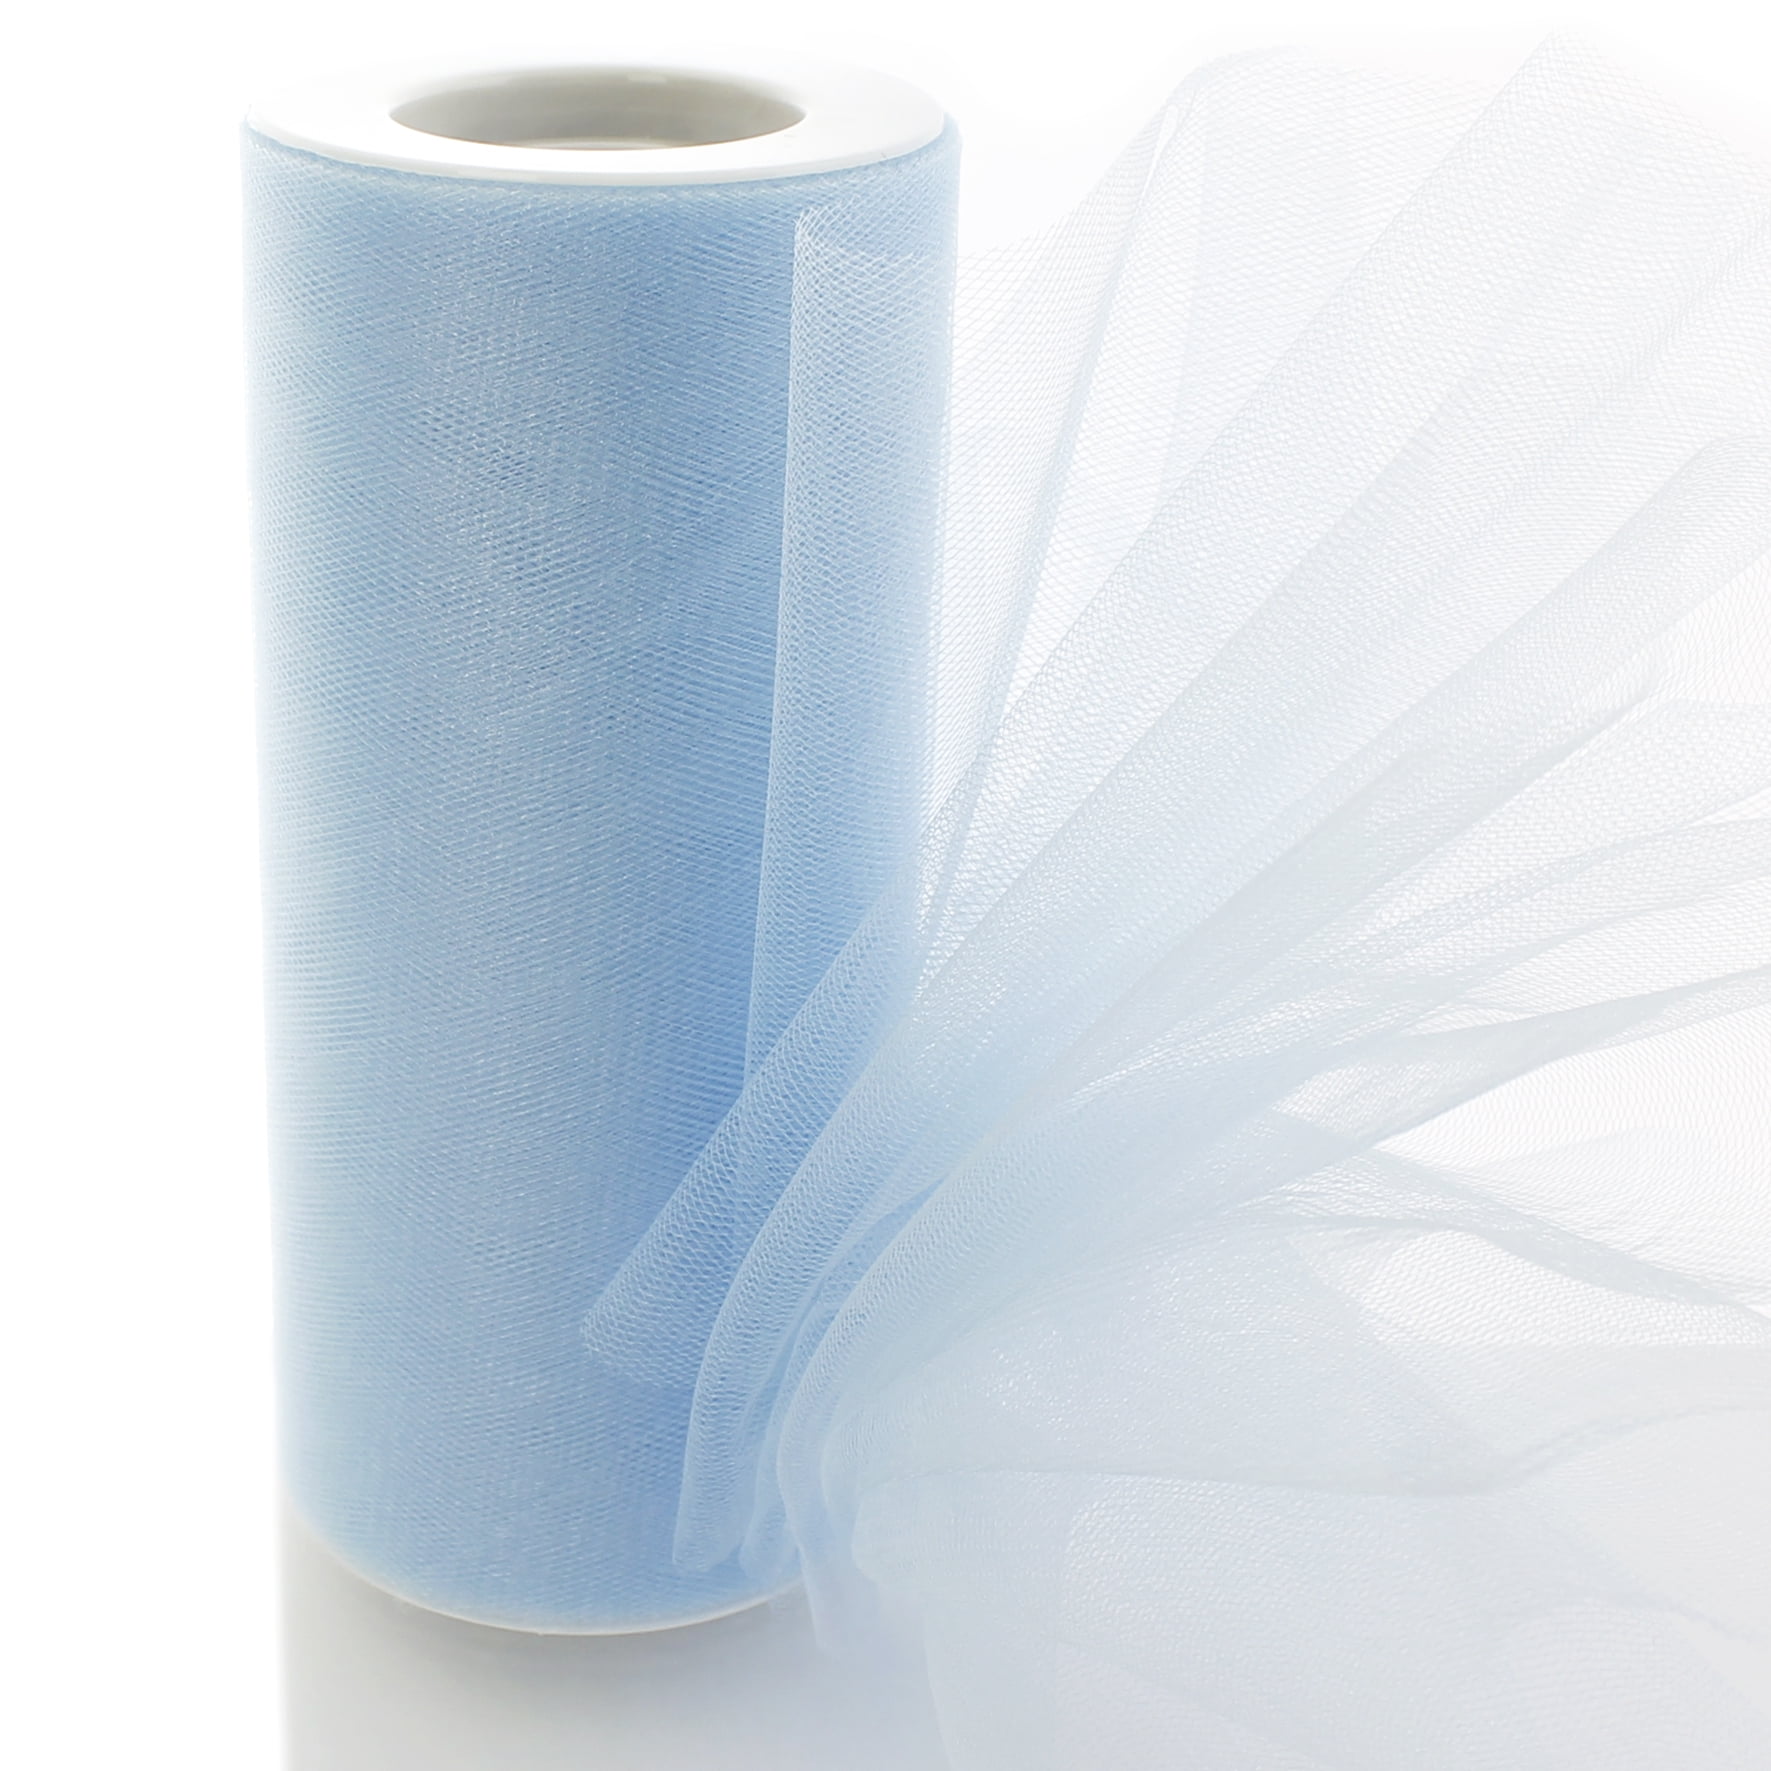 6 Shimmer Tulle Fabric Roll For Crafts, Wedding, Pary Decorations, Gifts -  Dusty Blue 25 Yards 